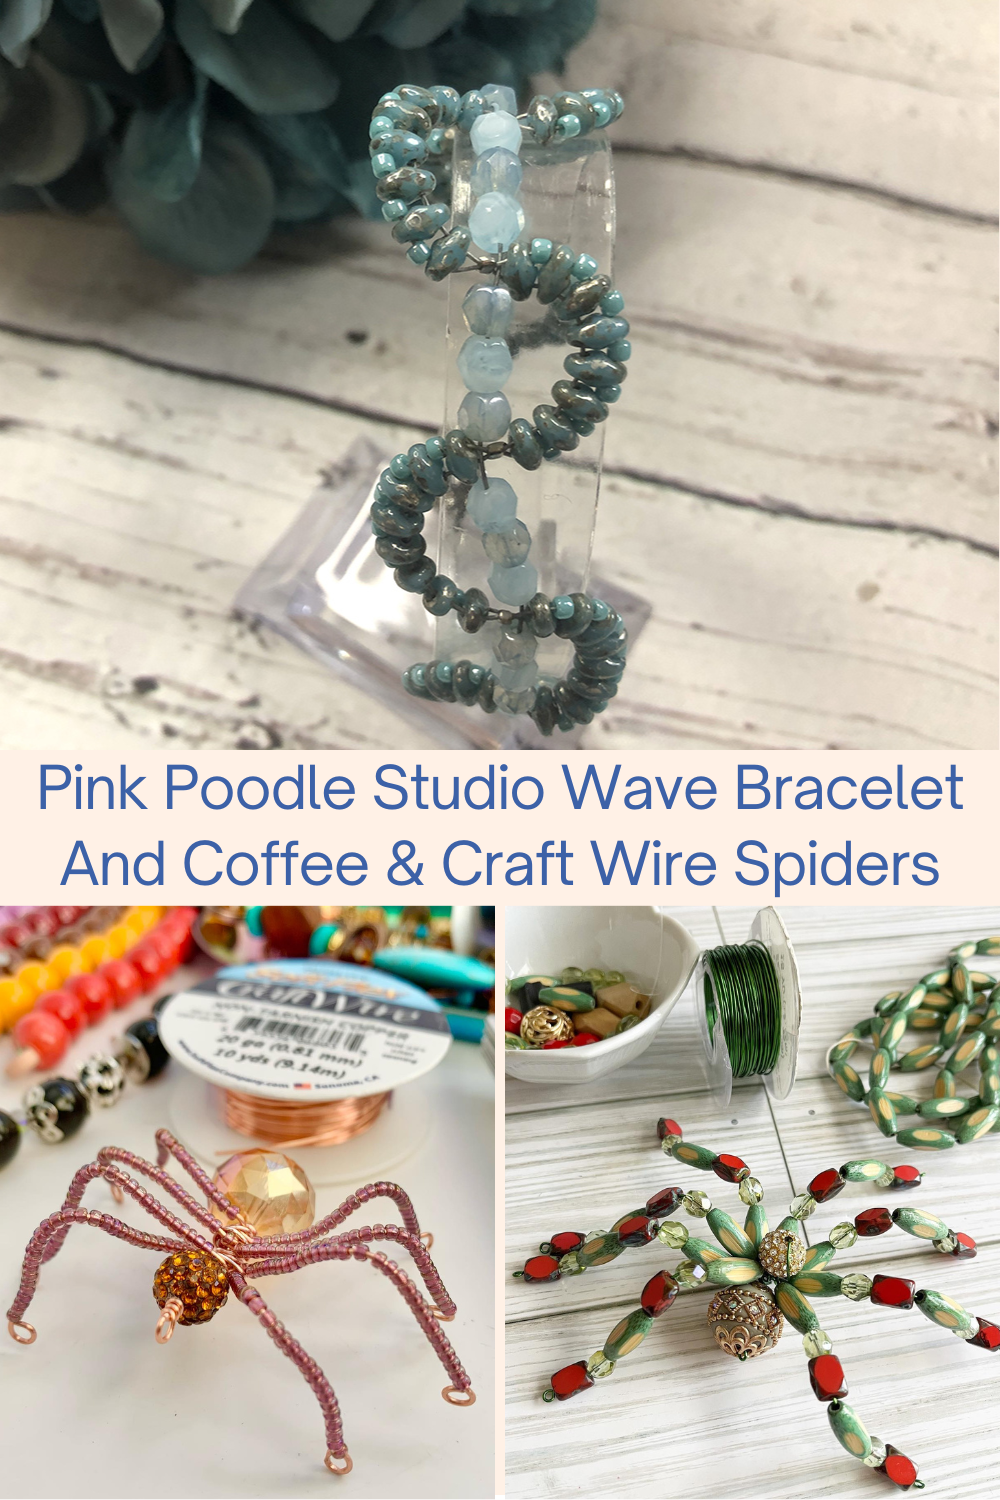 Pink Poodle Studio Wave Bracelet And Coffee & Craft Wire Spiders Collage